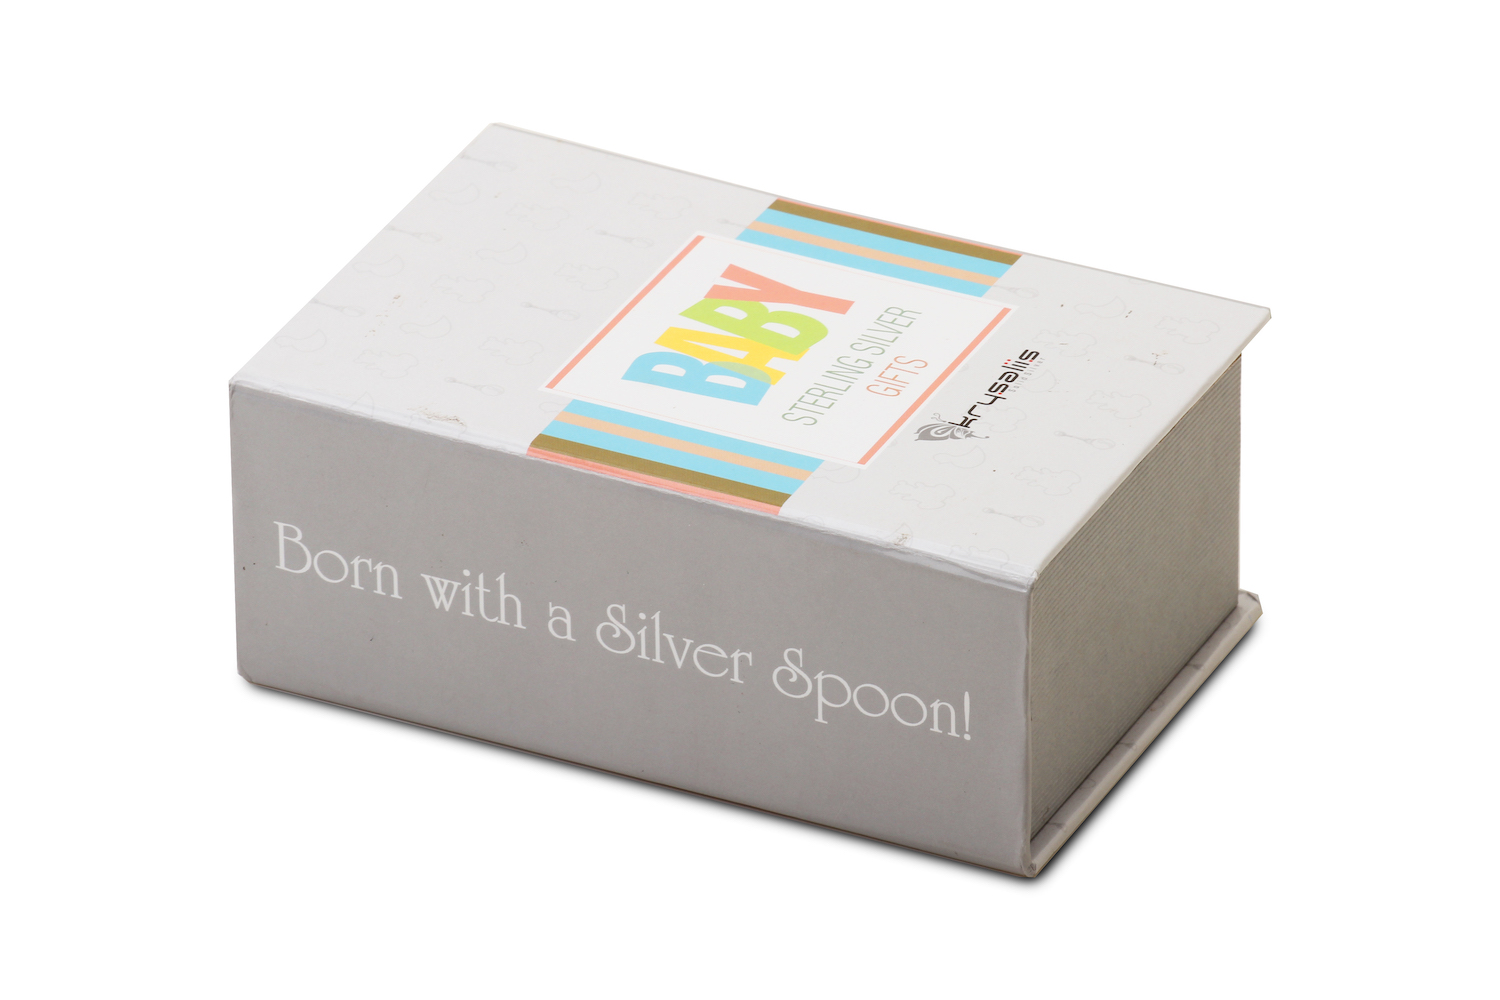 Silver Plated Gift Set For Baby - Hamper With Twisted Handle Cup And Spoon Fork Set Hampers